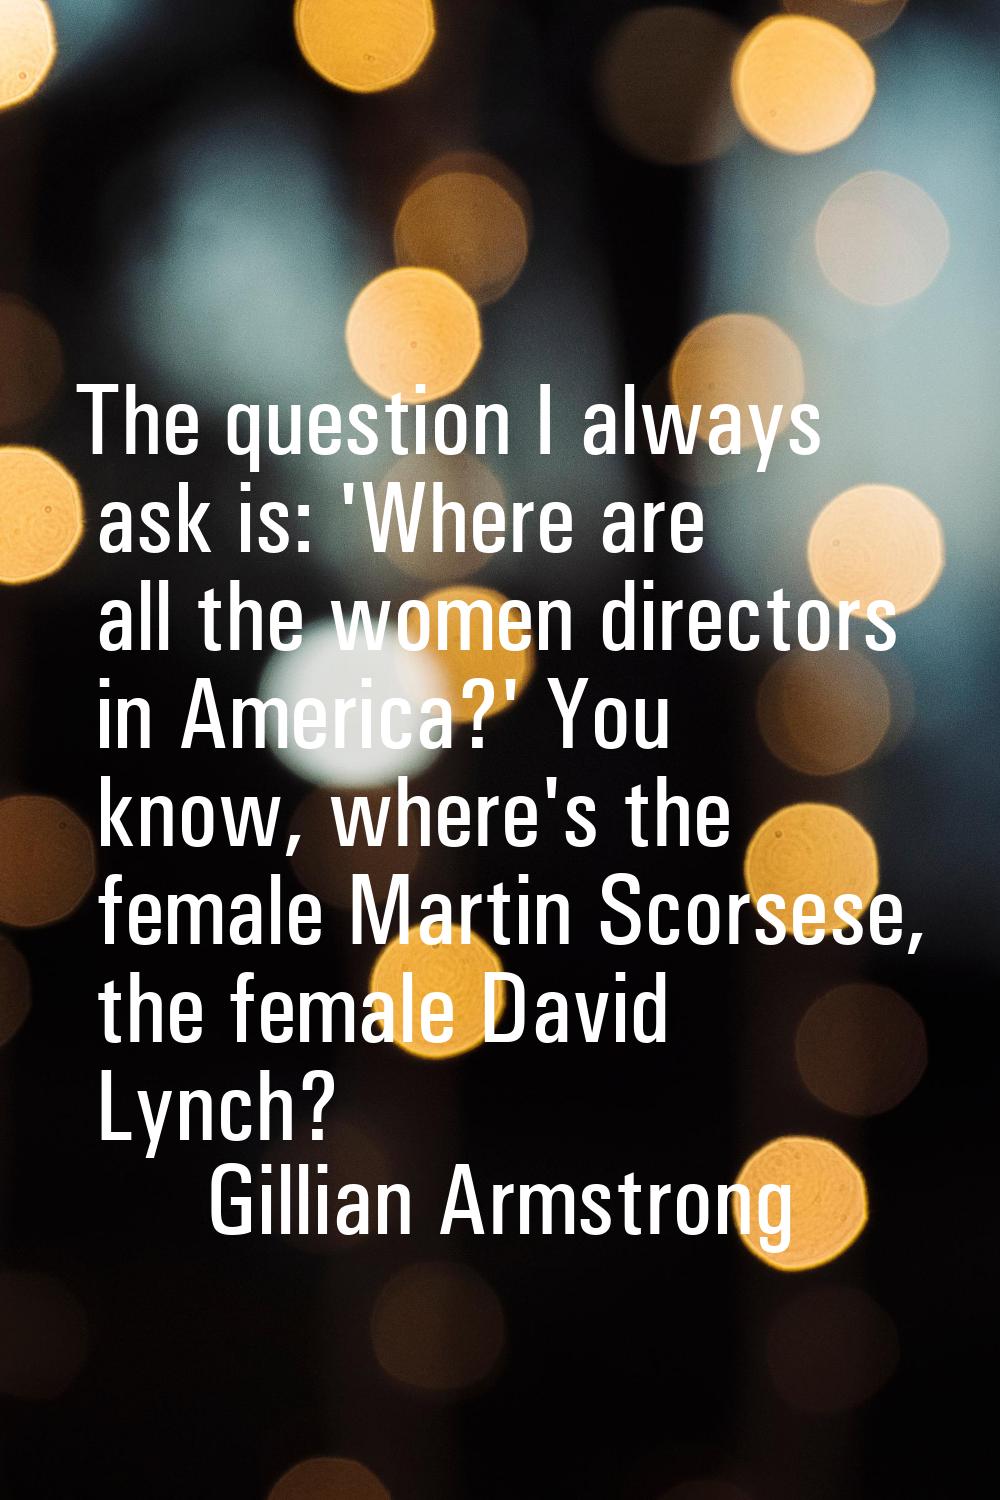 The question I always ask is: 'Where are all the women directors in America?' You know, where's the